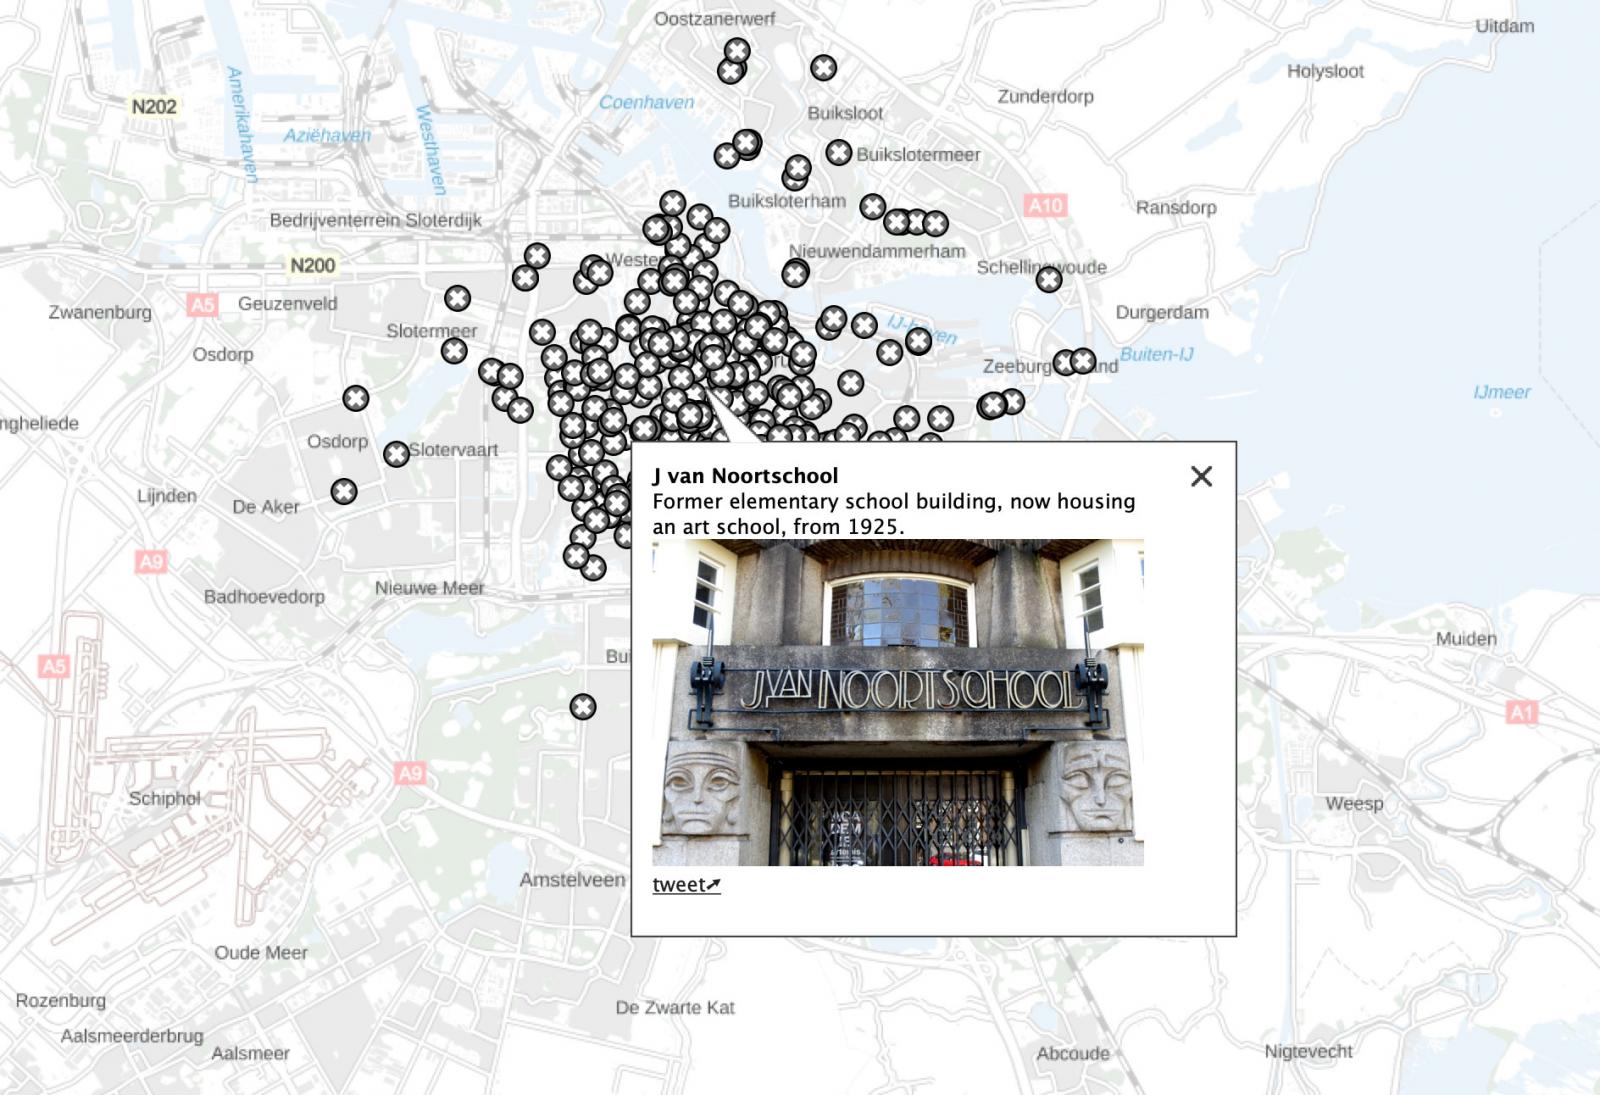 More information about "Amsterdam Typography Map"